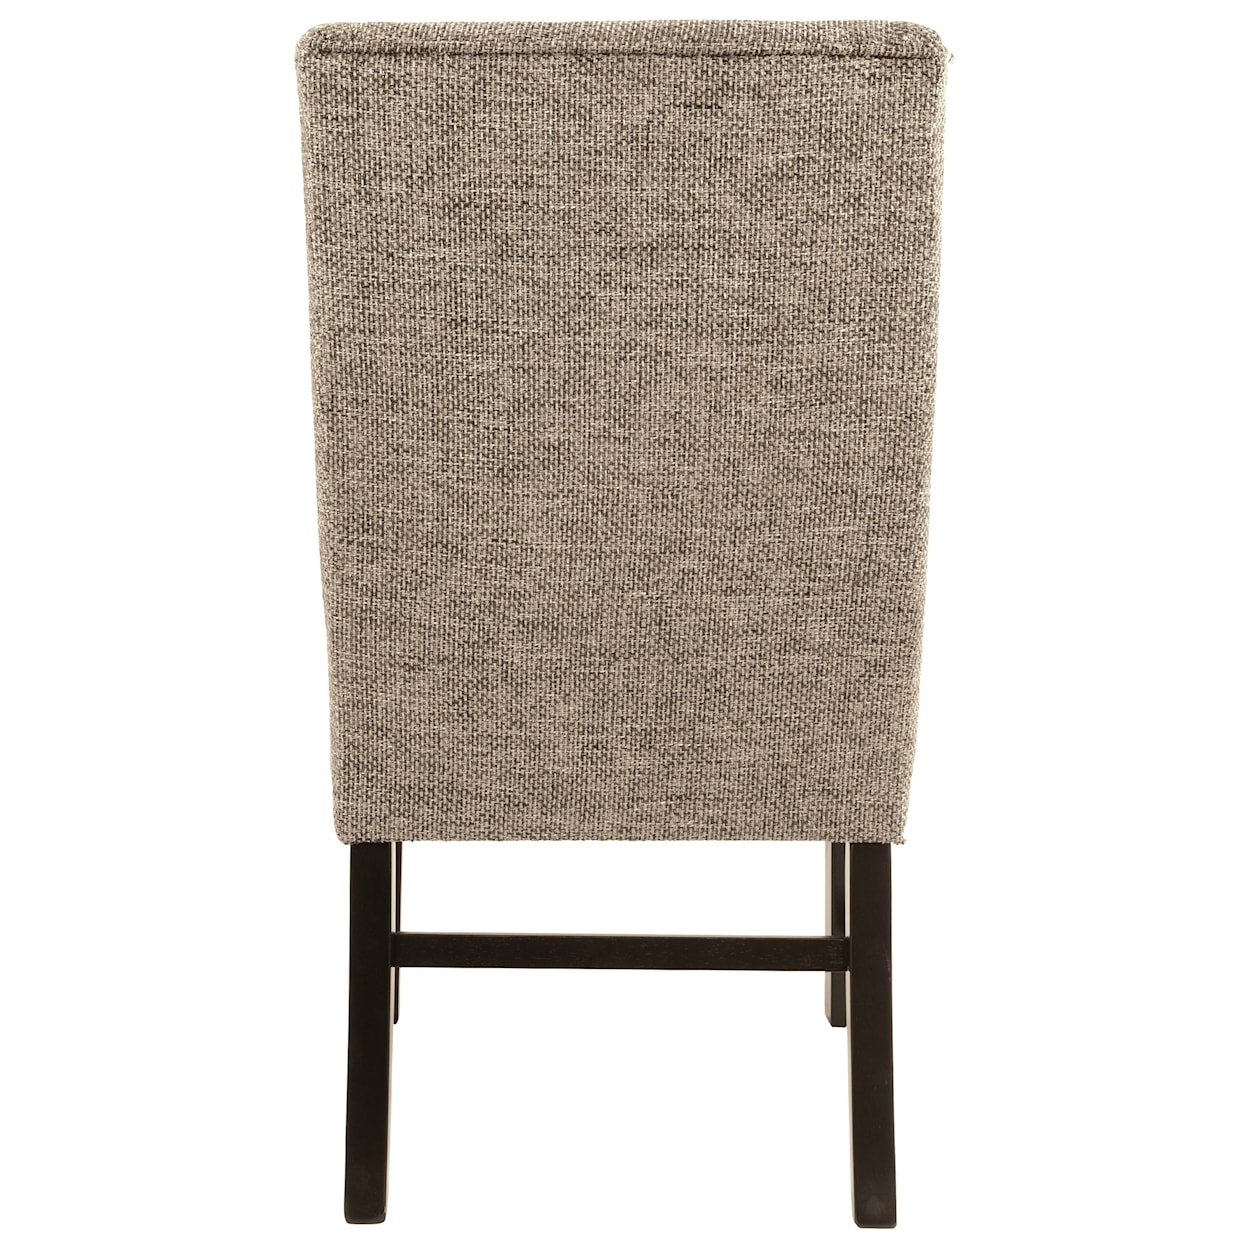 Signature Design by Ashley Sommerford Dining Upholstered Arm Chair